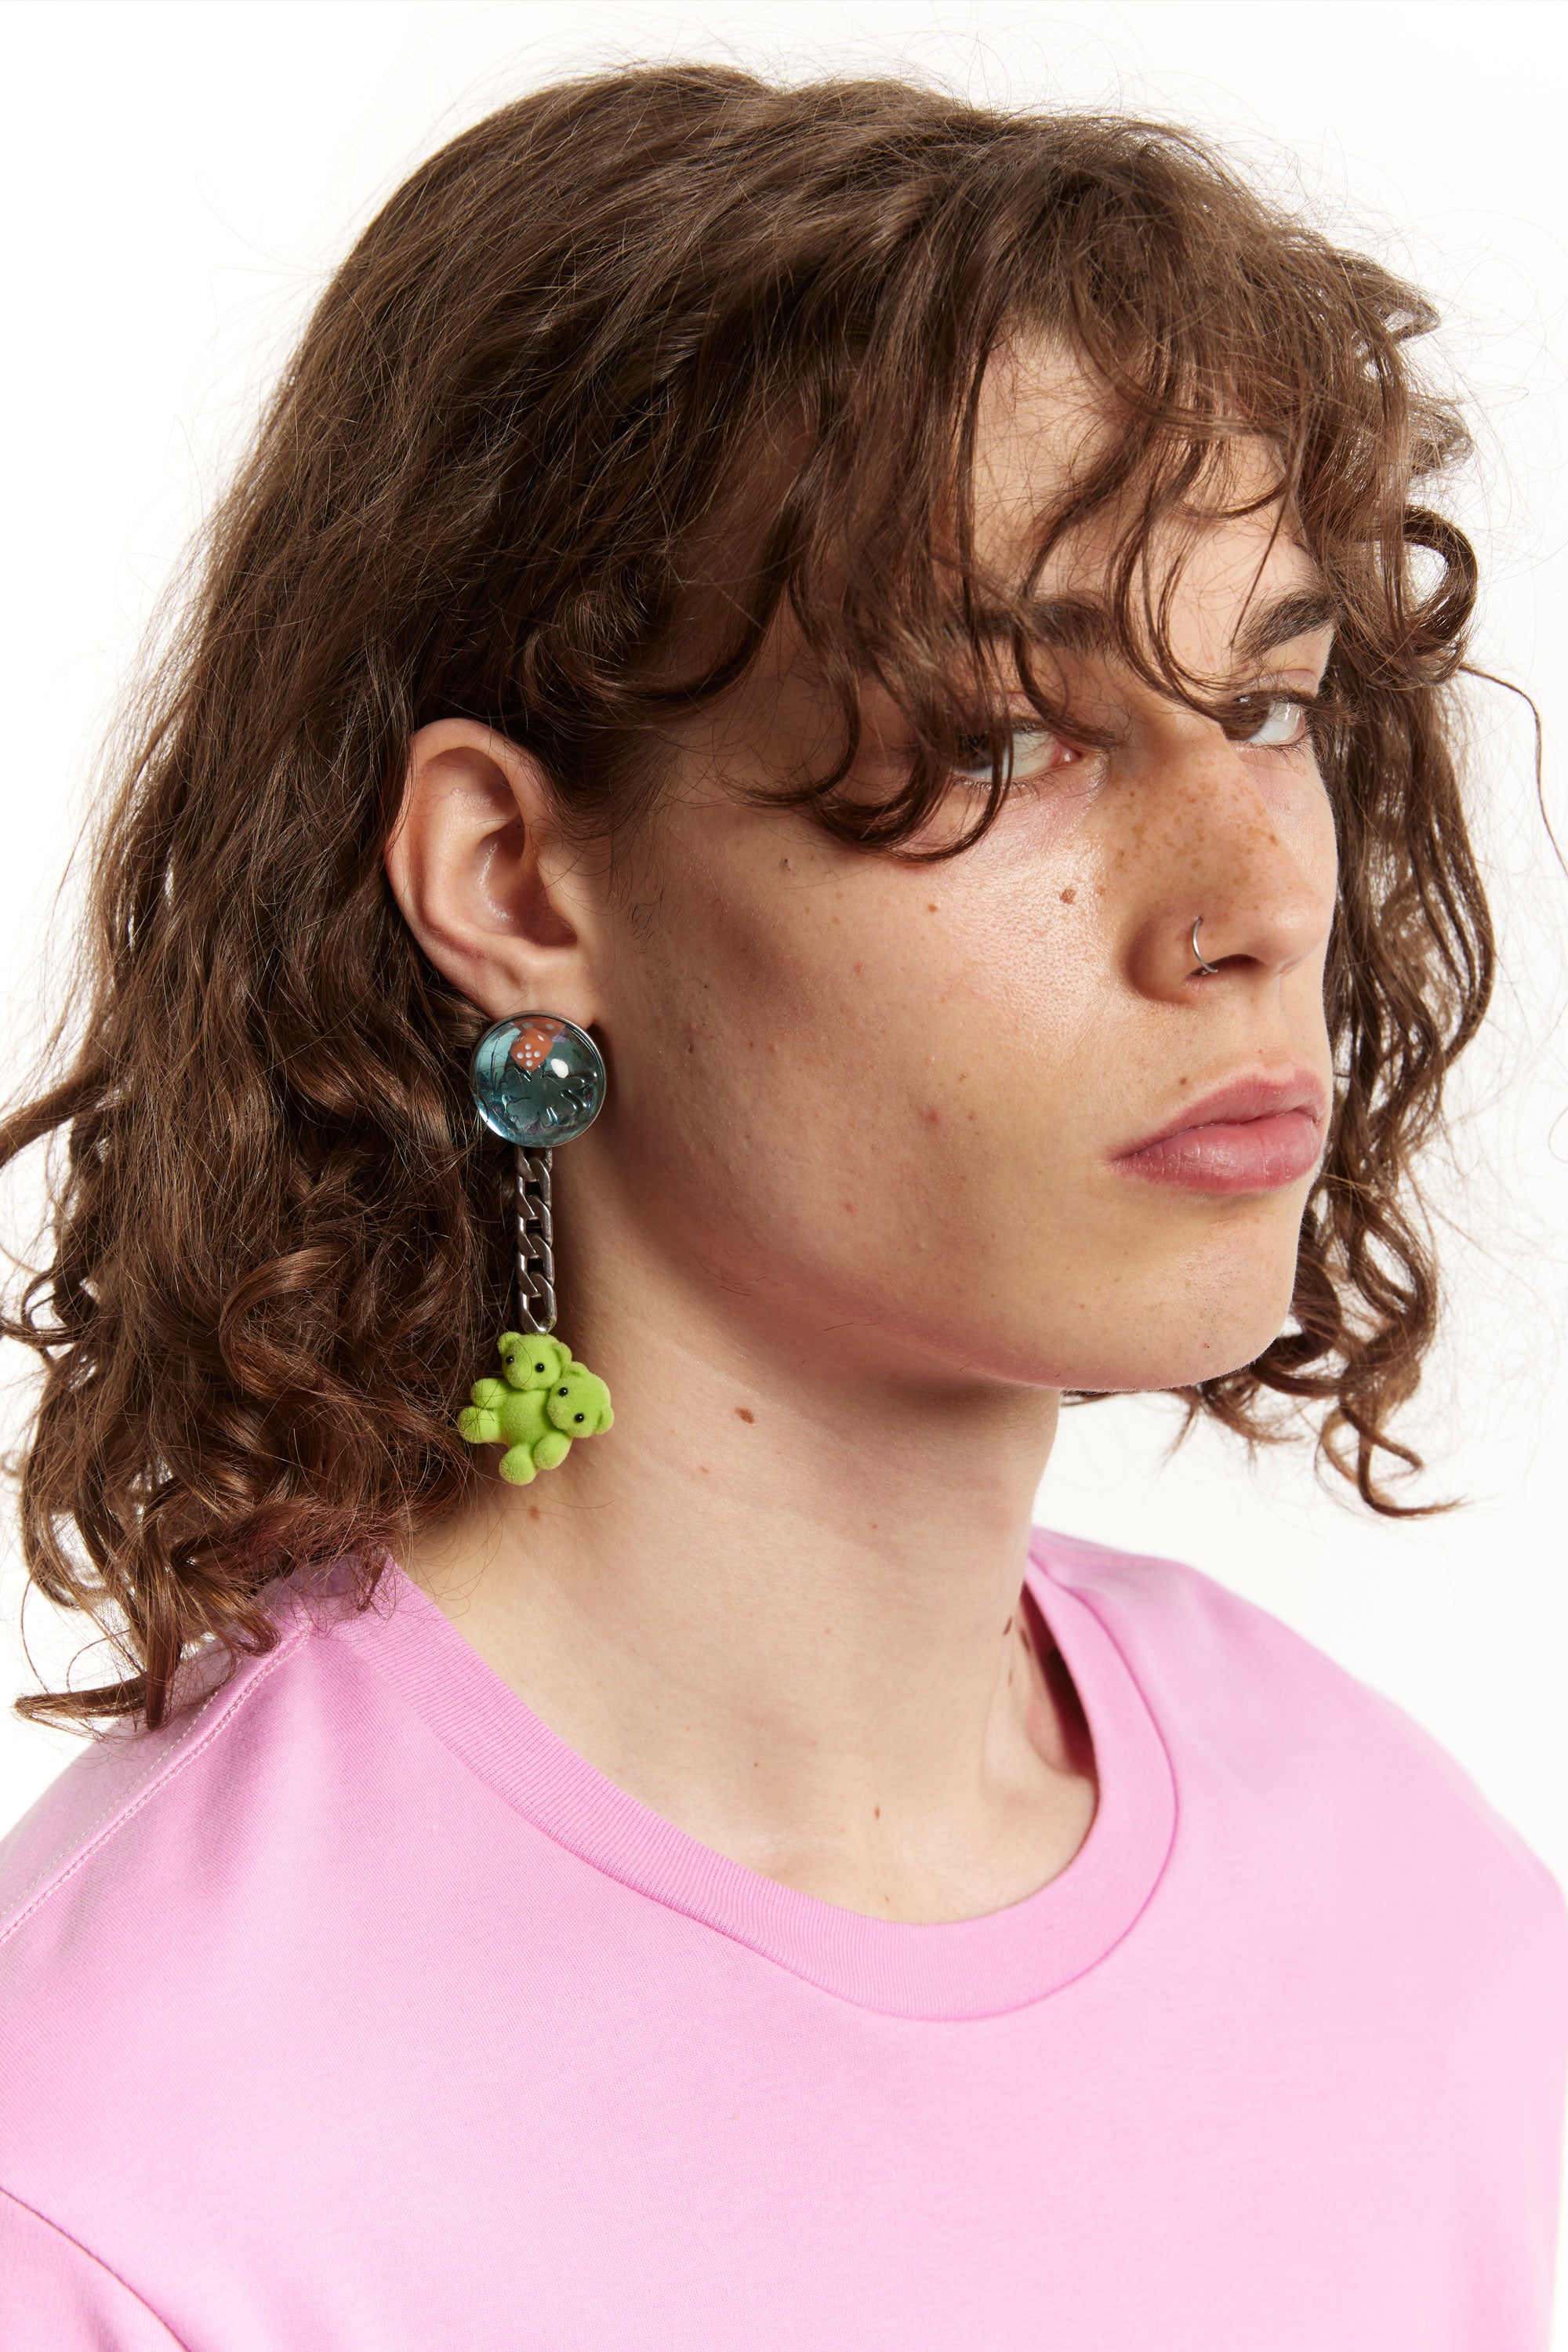 The HEAVEN - HEAVEN KIKO CHARM DROP EARRINGS  available online with global shipping, and in PAM Stores Melbourne and Sydney.